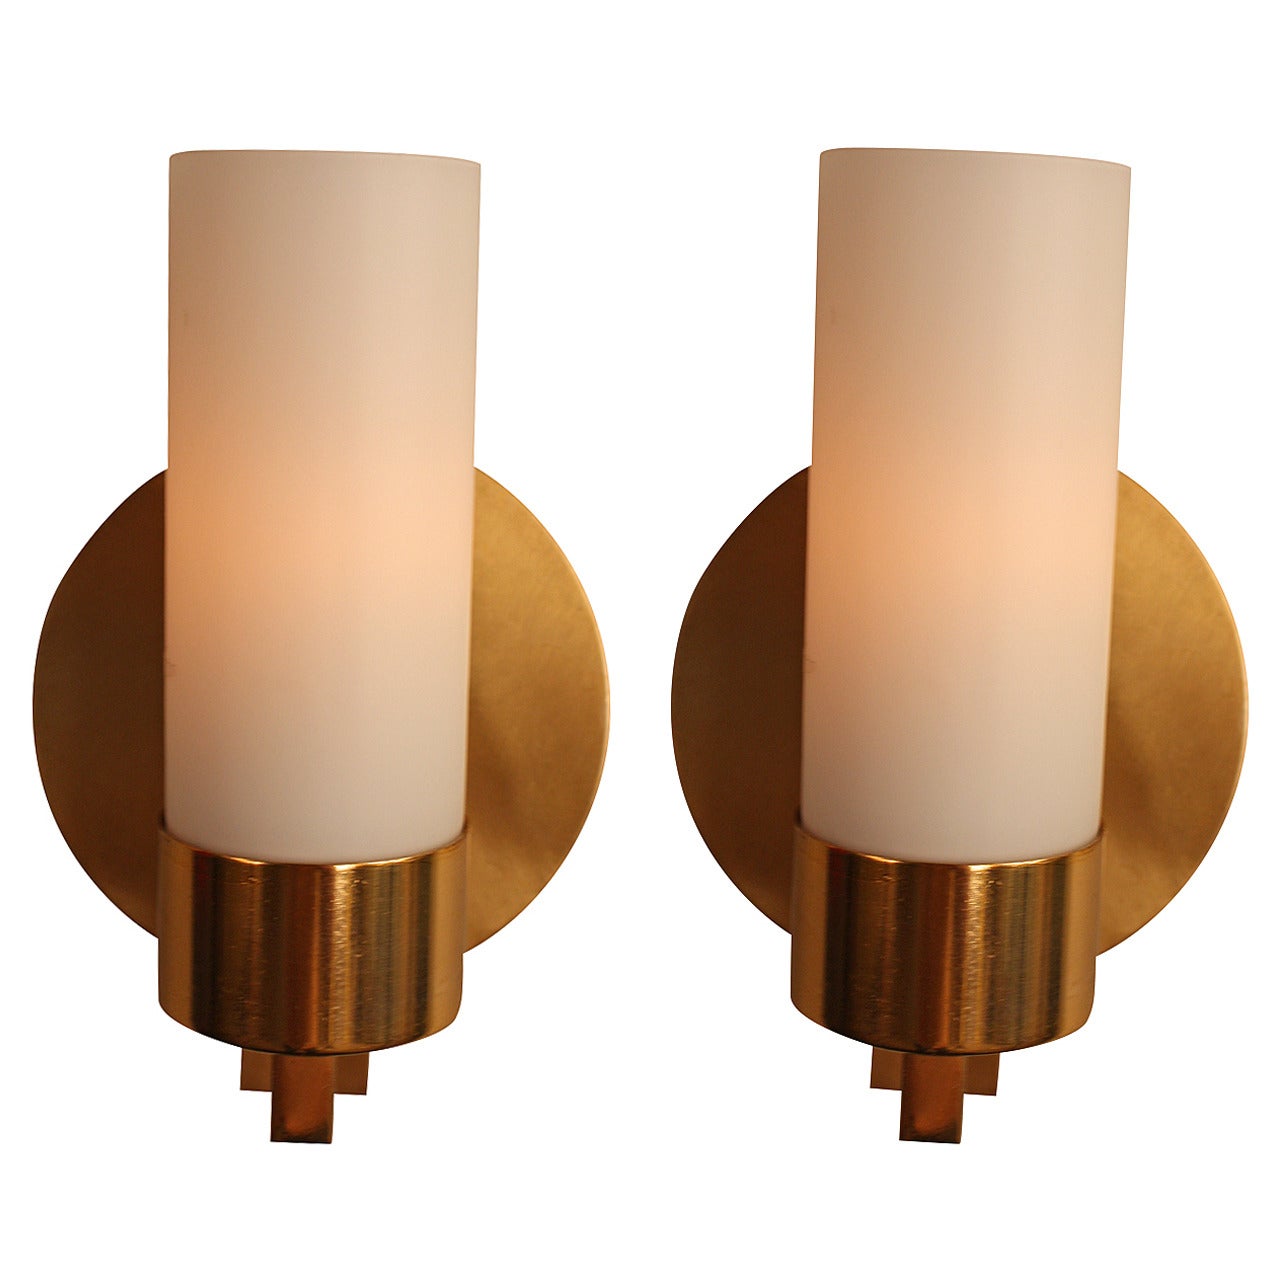 Pair of Modern Bronze Wall Sconces